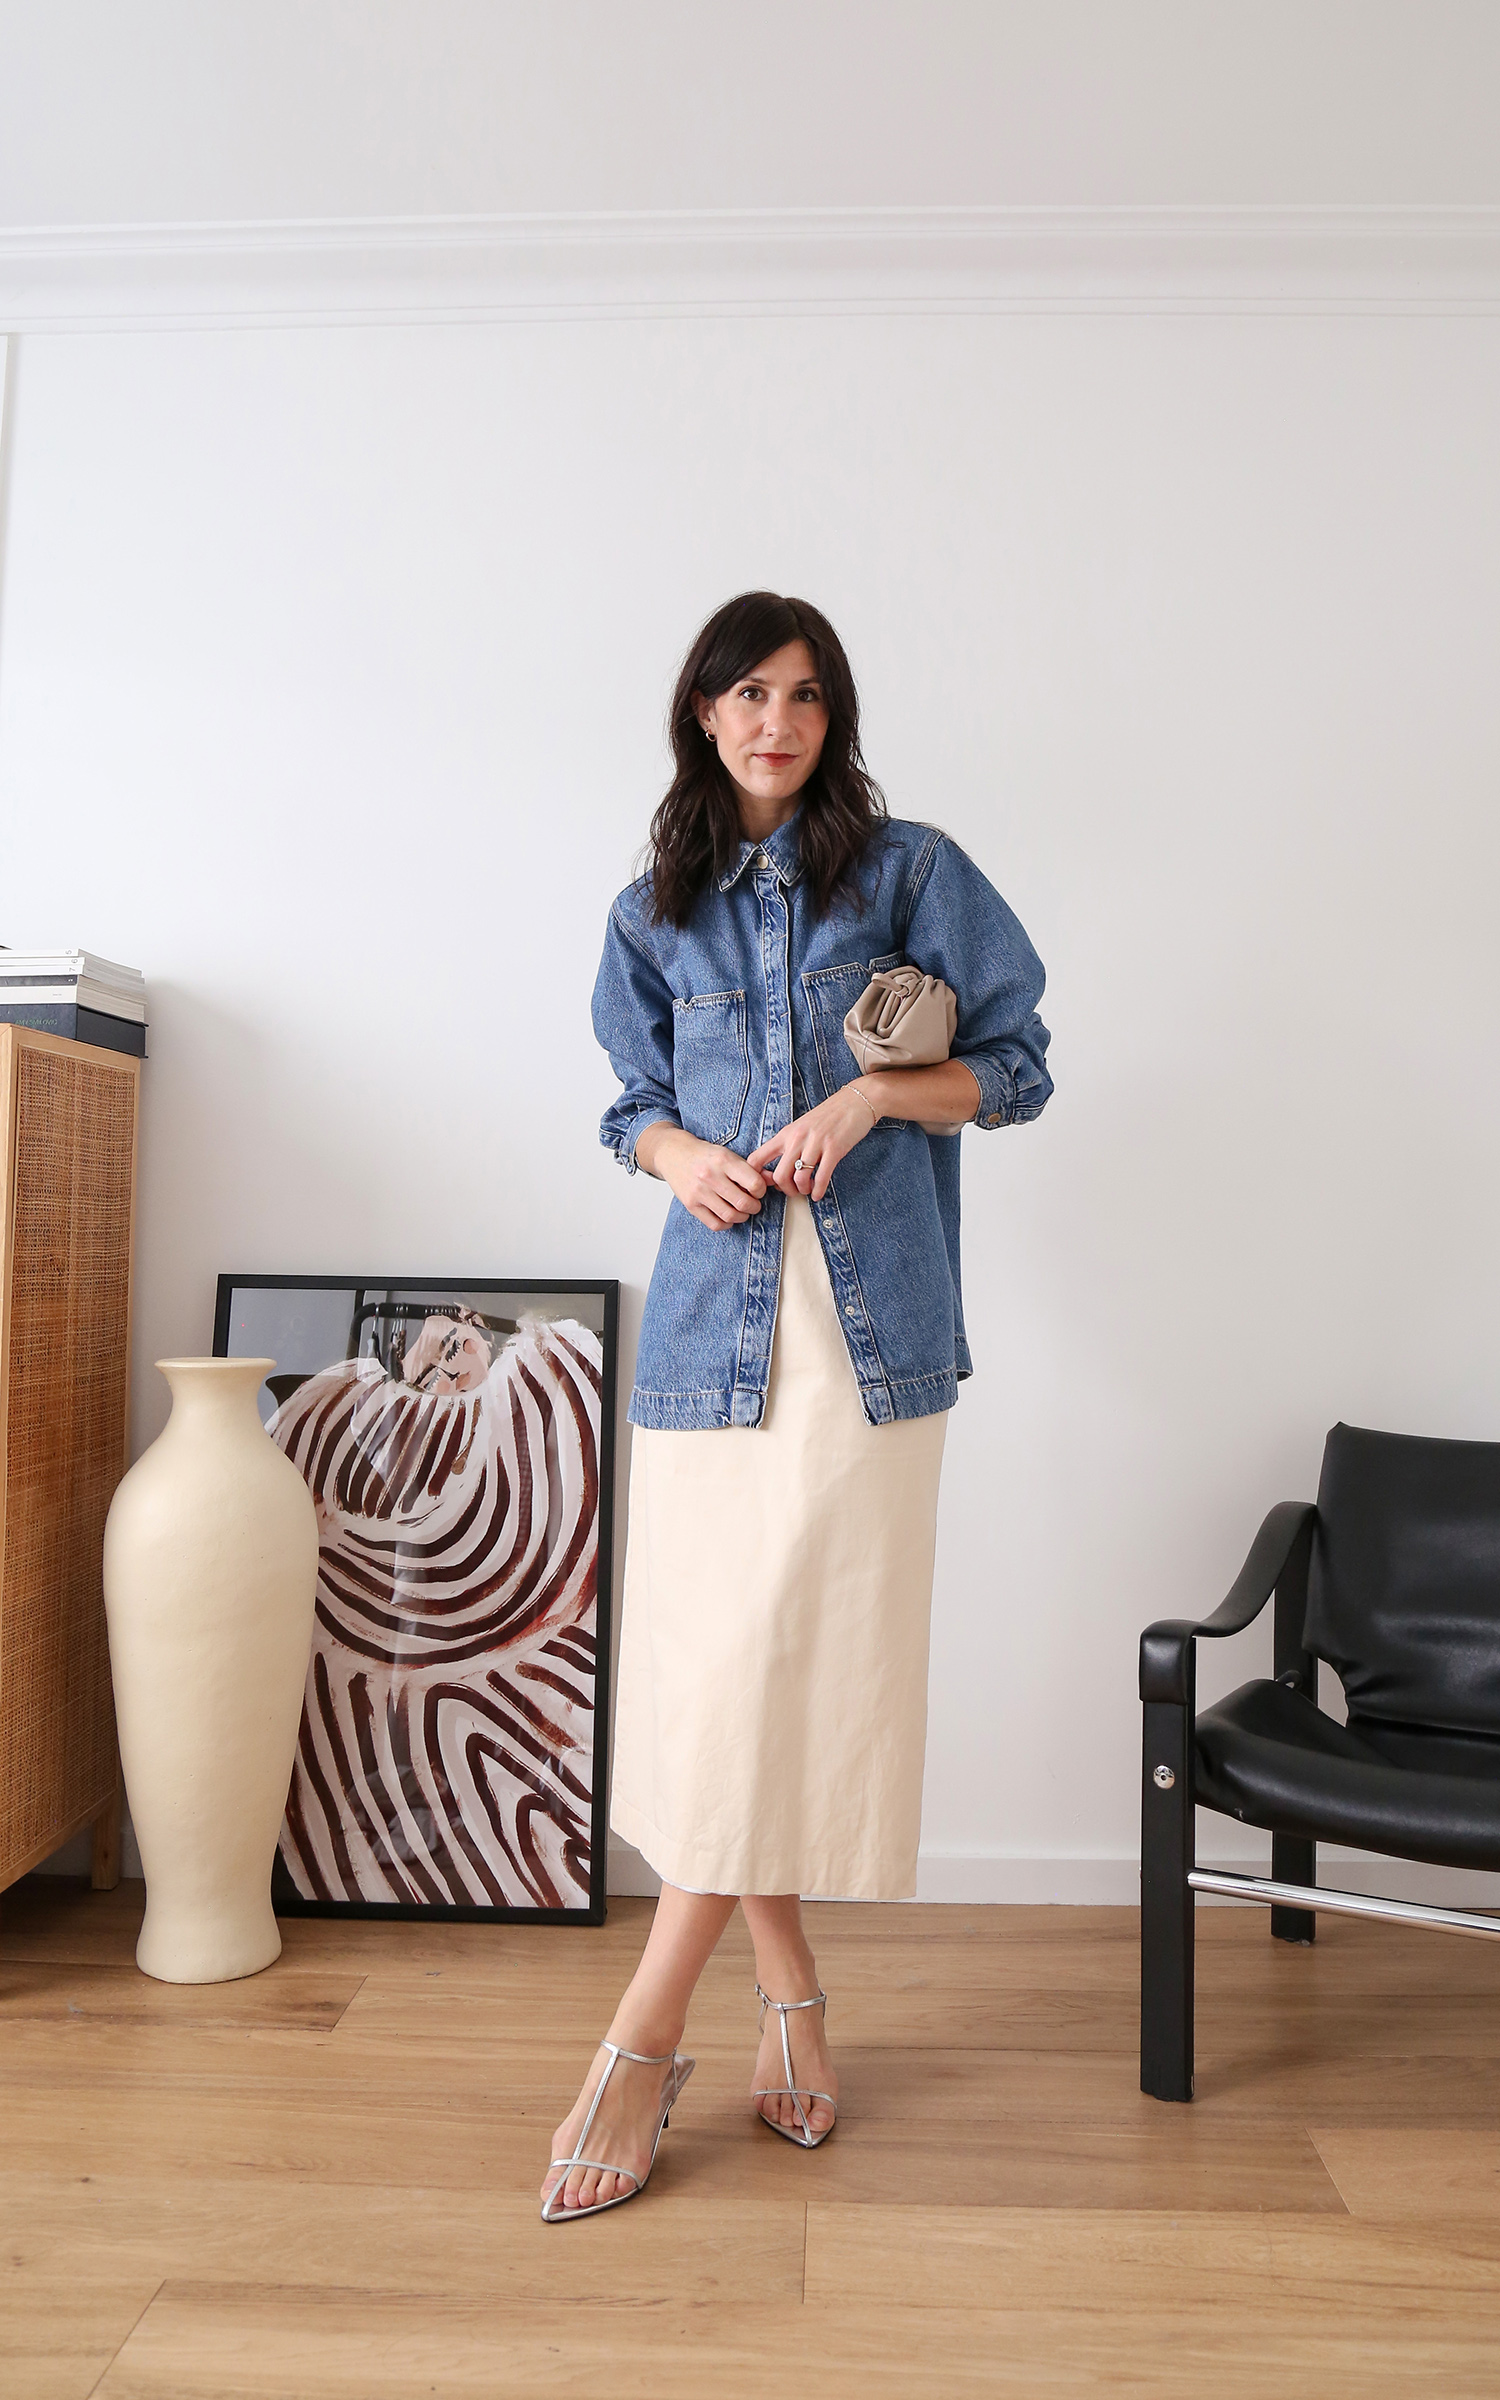 Styling a denim jacket with a pencil skirt